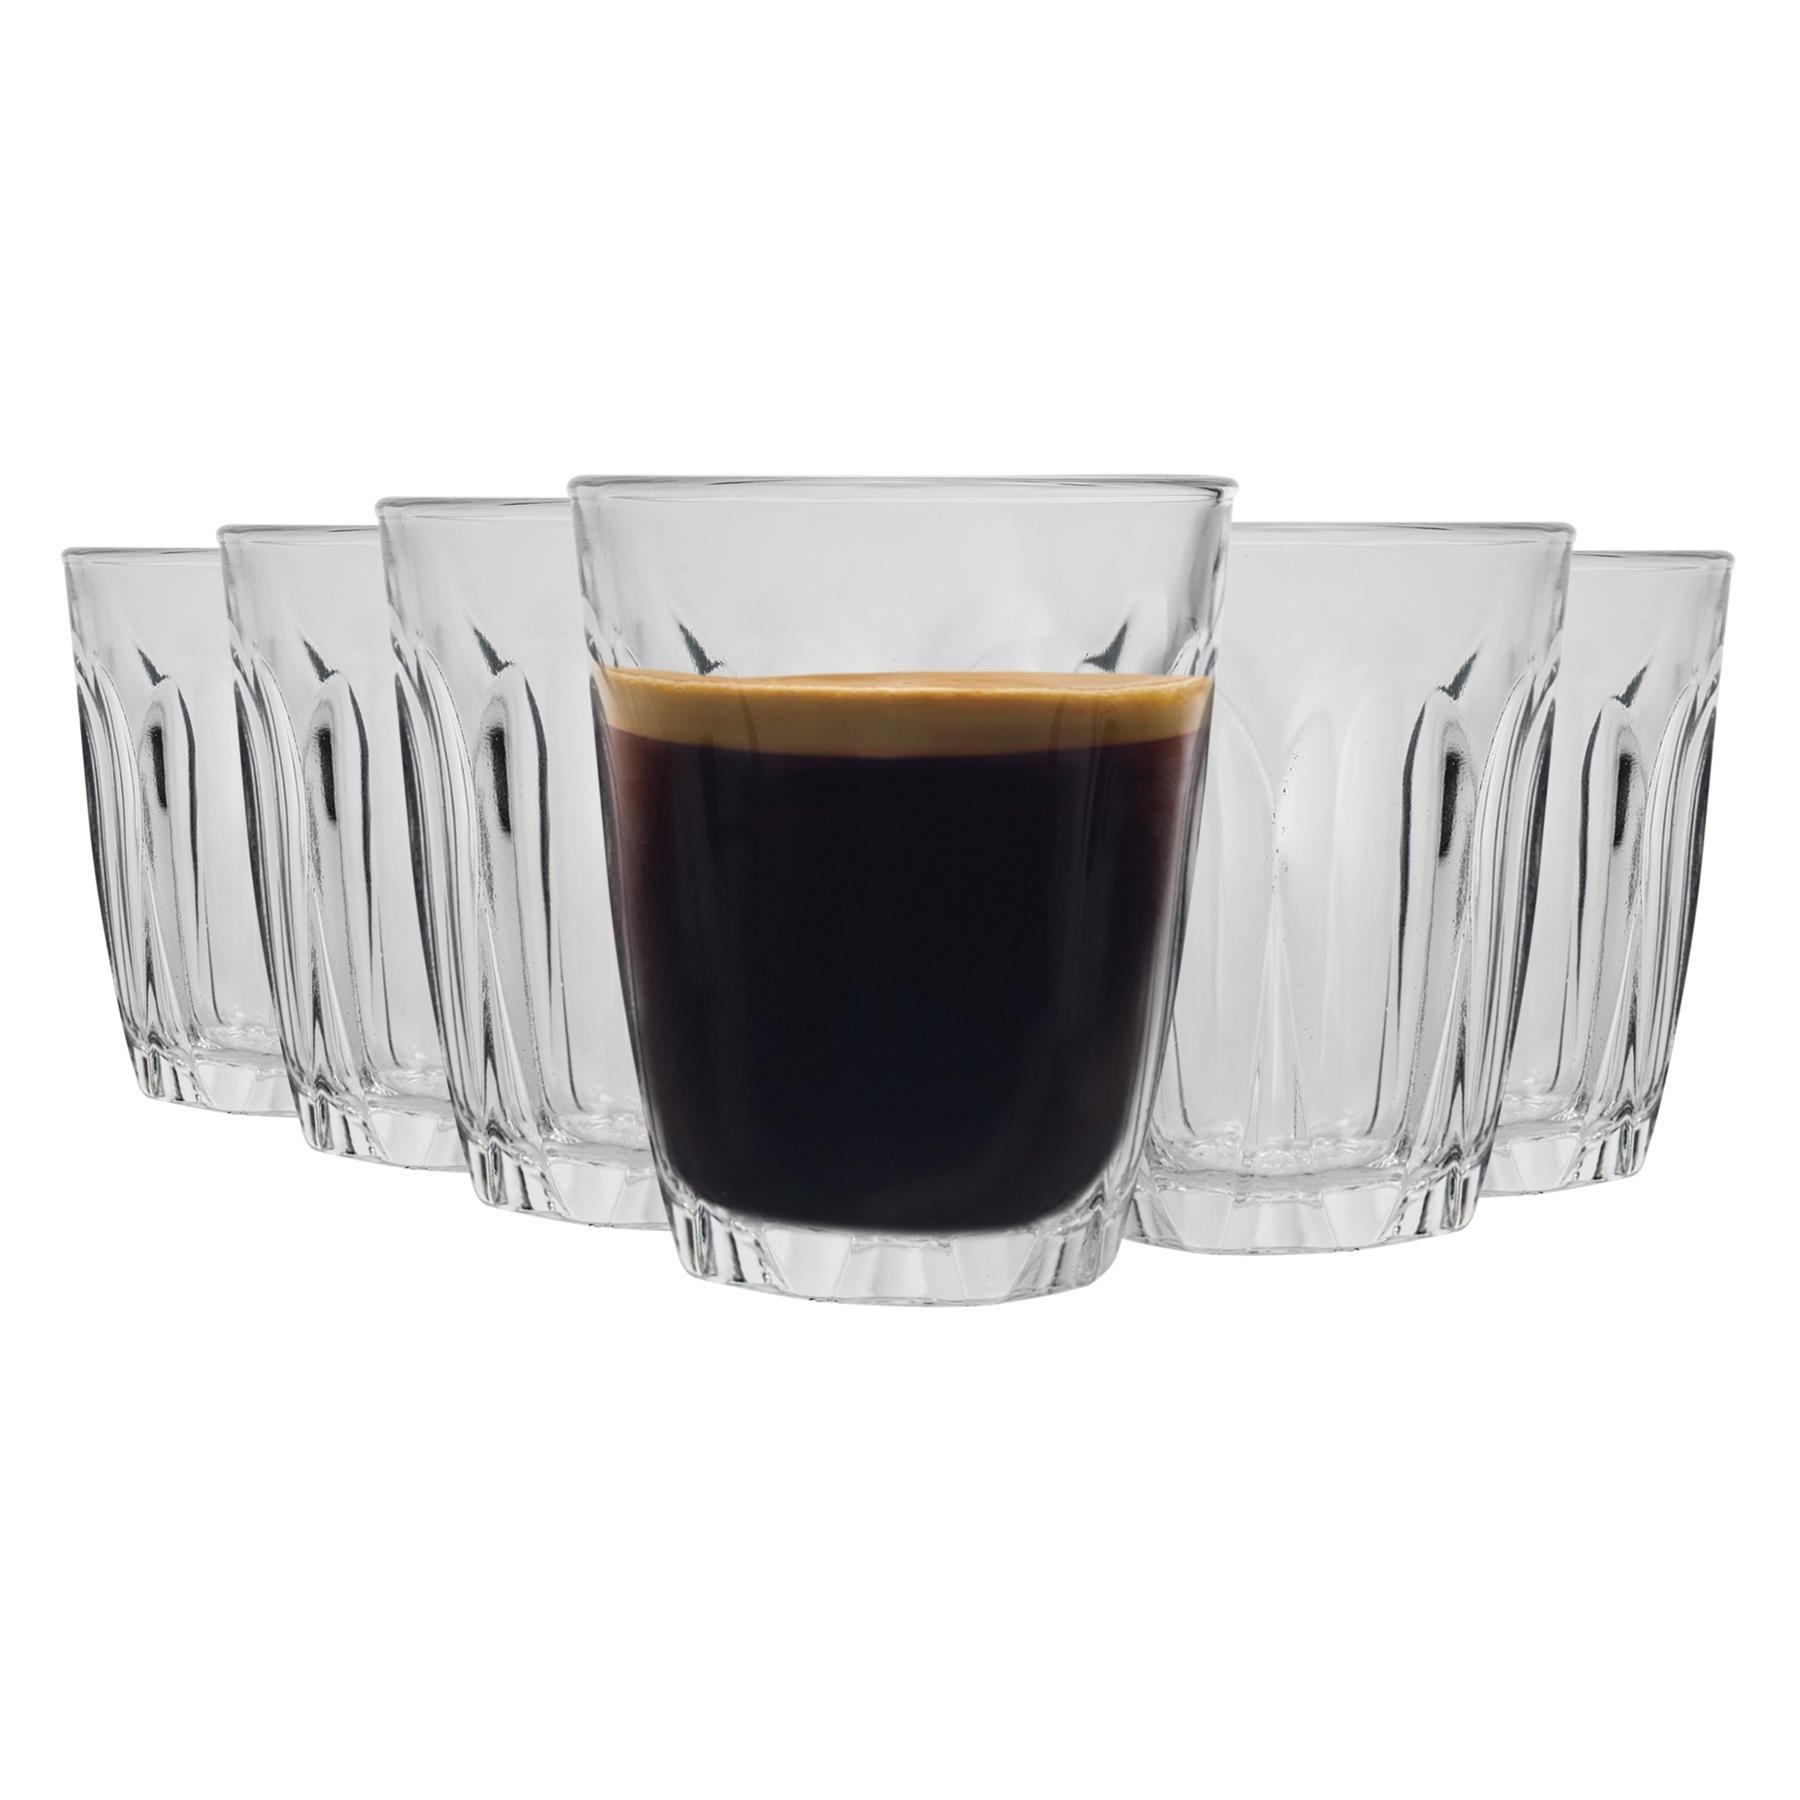 Photos - Mug / Cup Duralex Provence Shot Glass Espresso Cups - 90ml Drinking Glasses - Pack of 12 